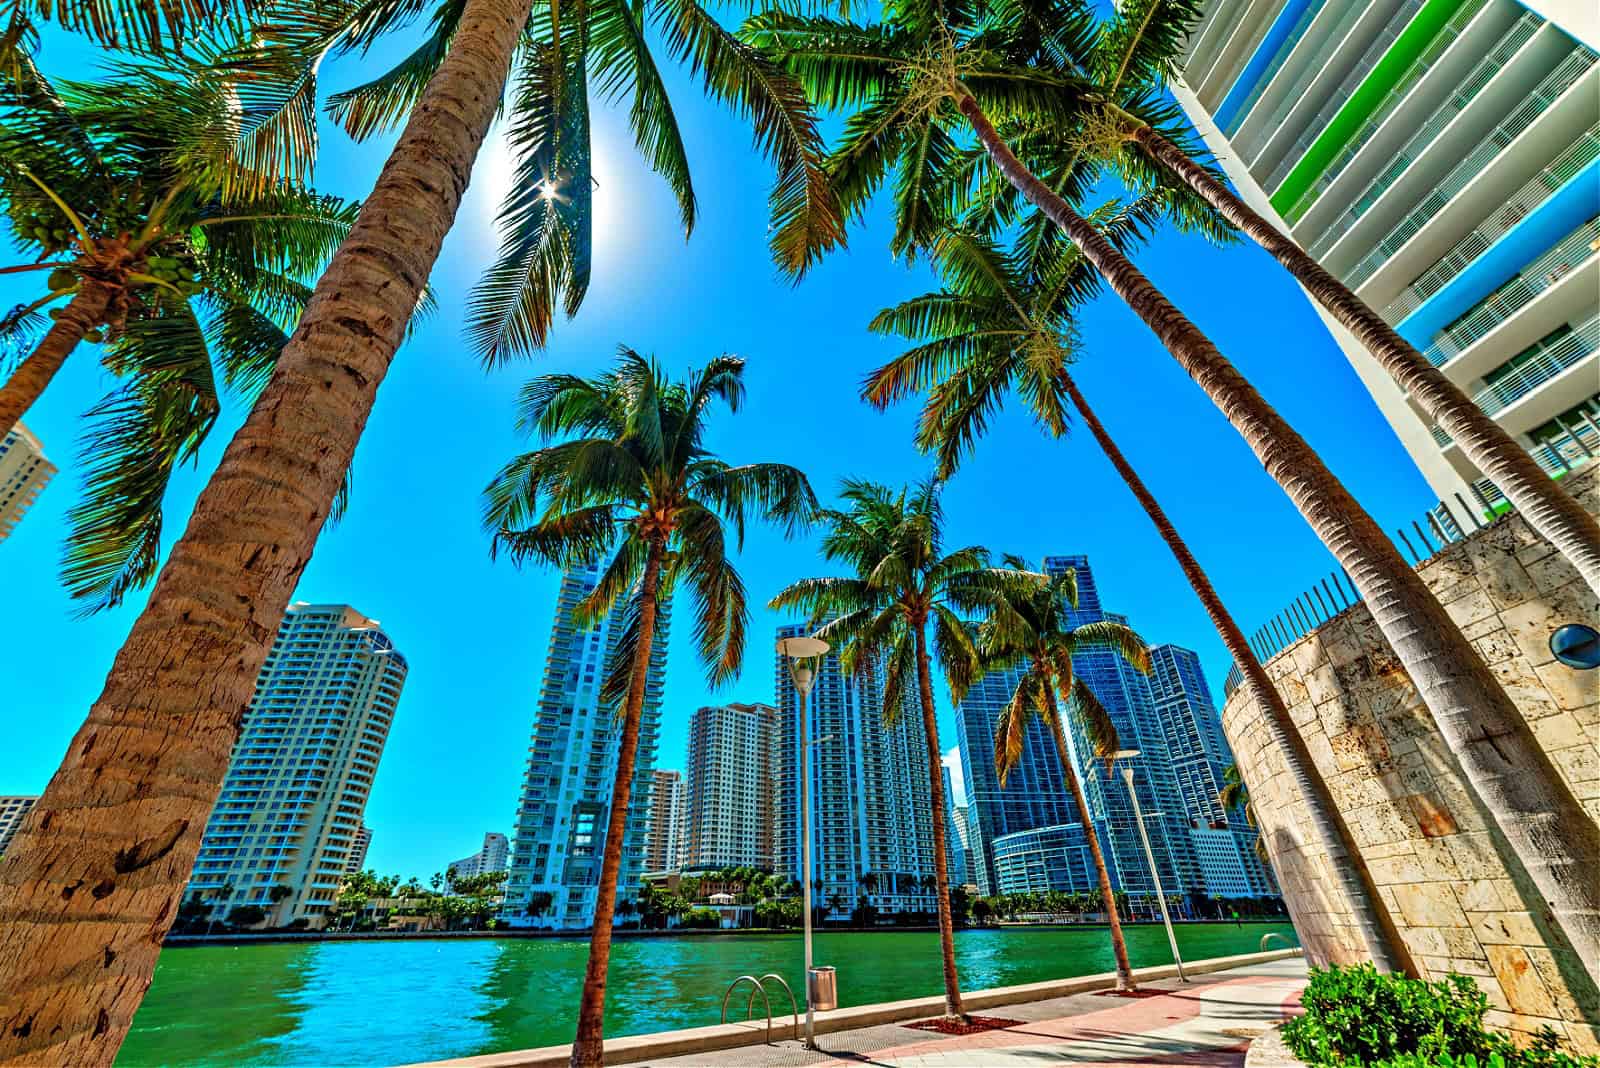 Palm trees and skyscrapers in Miami riverwalk, USA